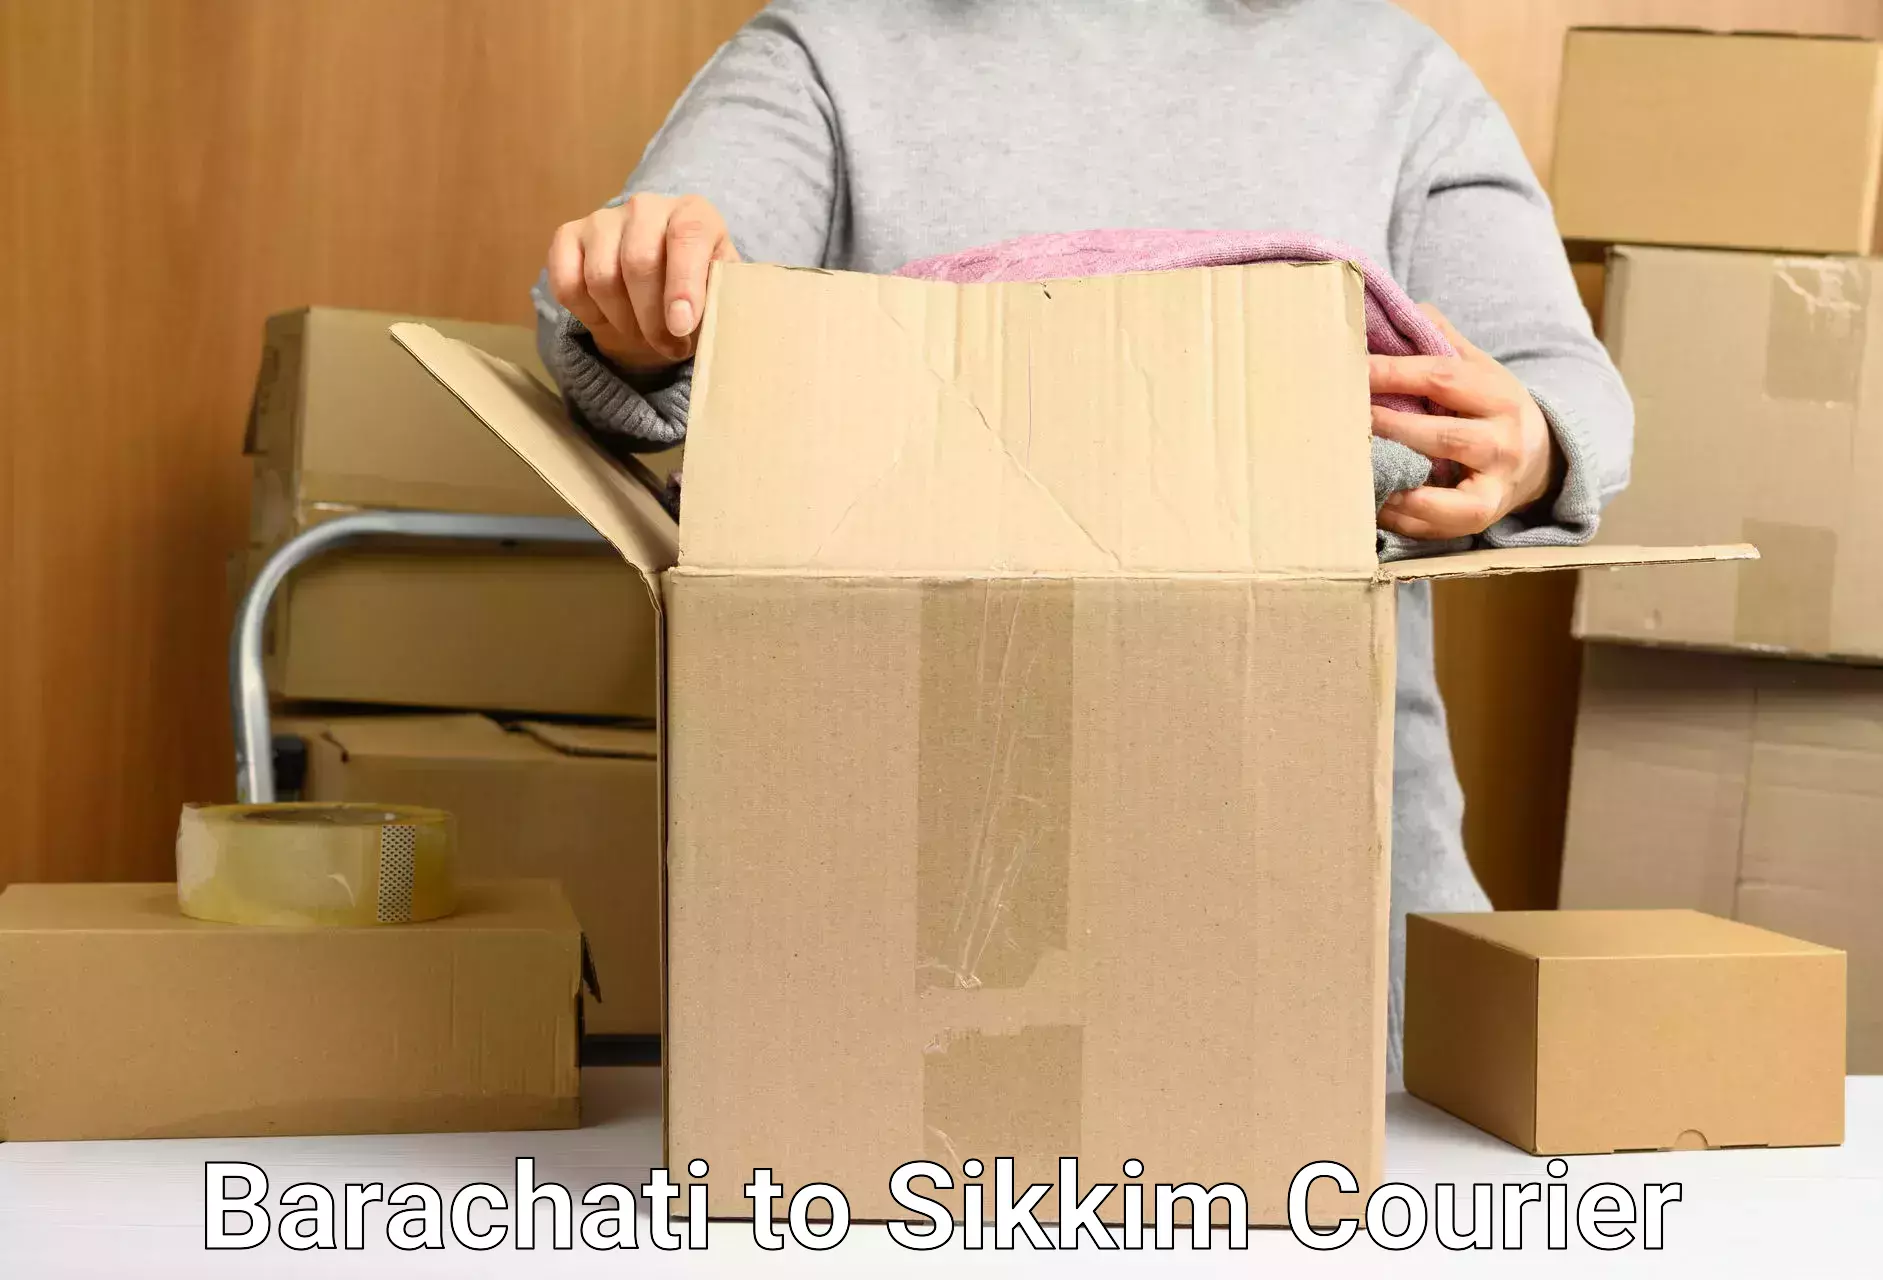 Easy access courier services in Barachati to Namchi